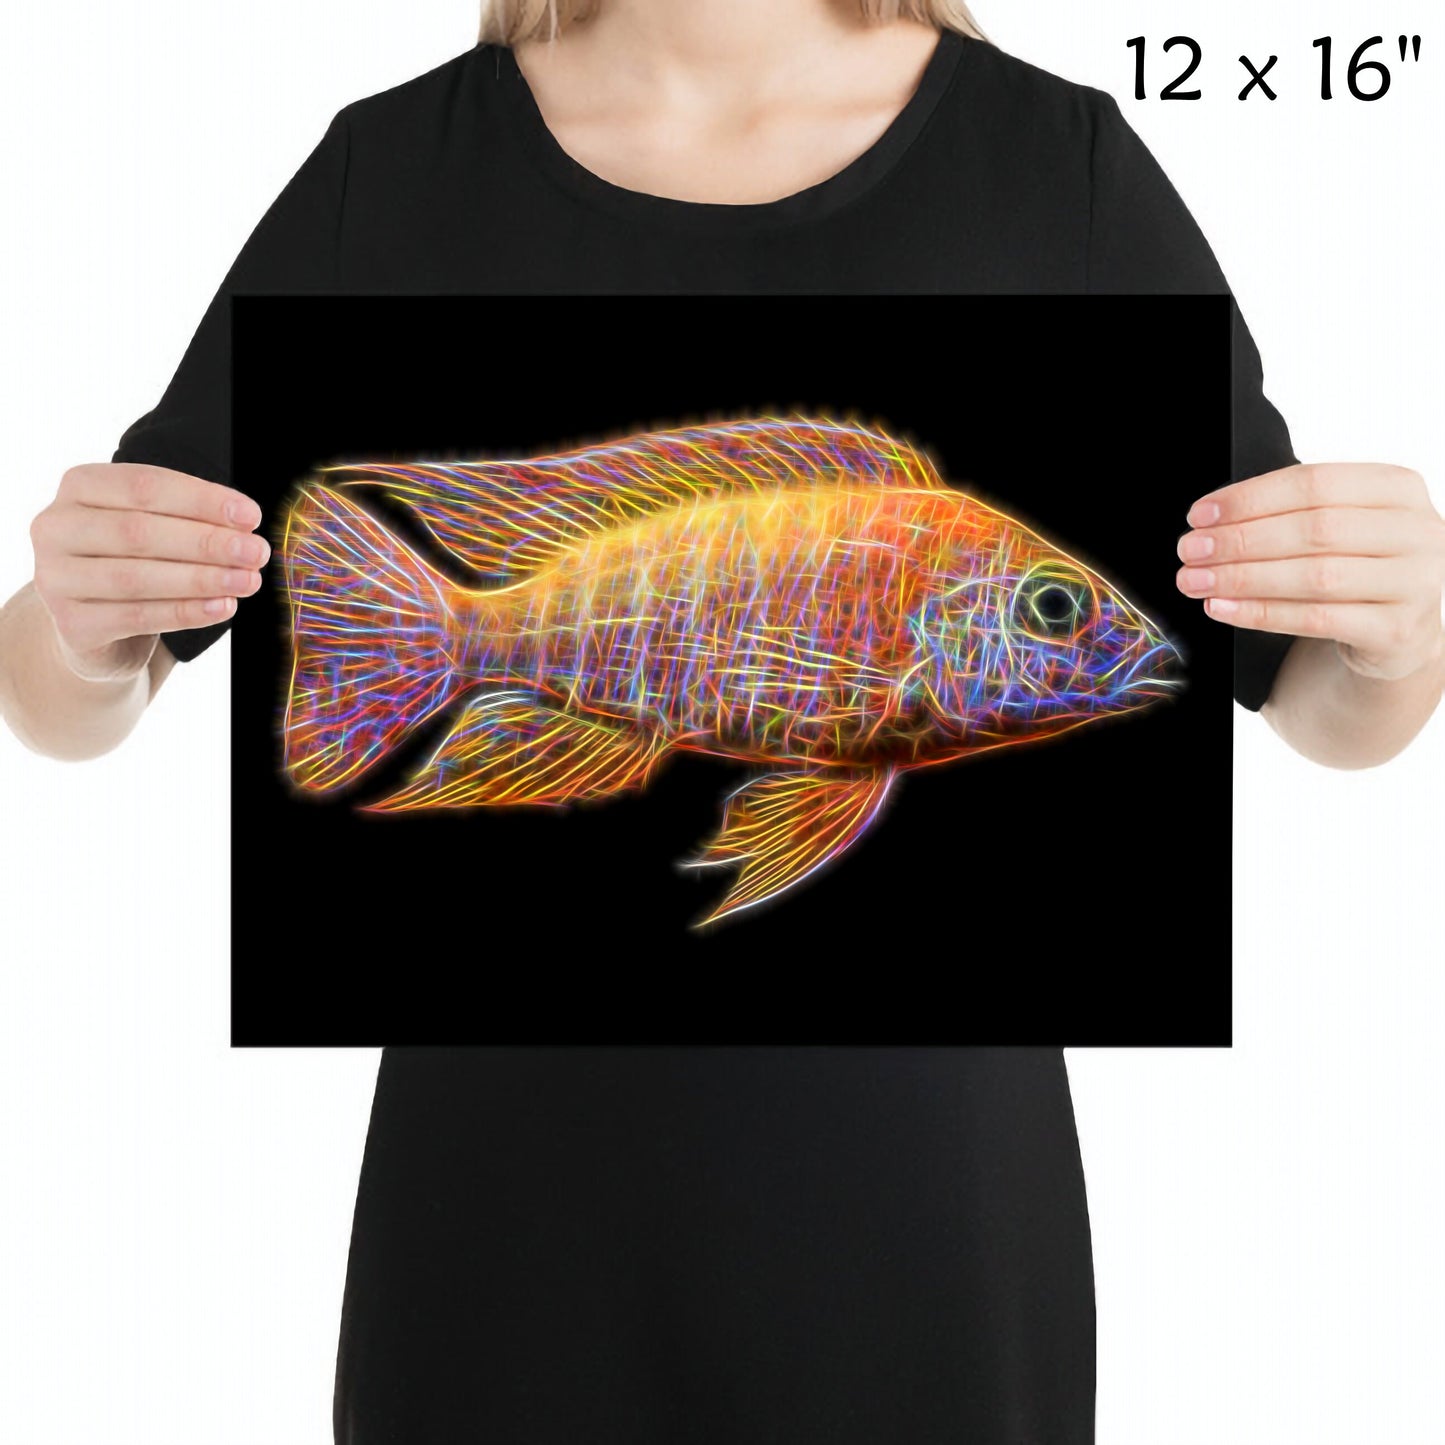 Ruby Red Peacock Cichlid Fish Print with Stunning Fractal Art Design. Aulonocara